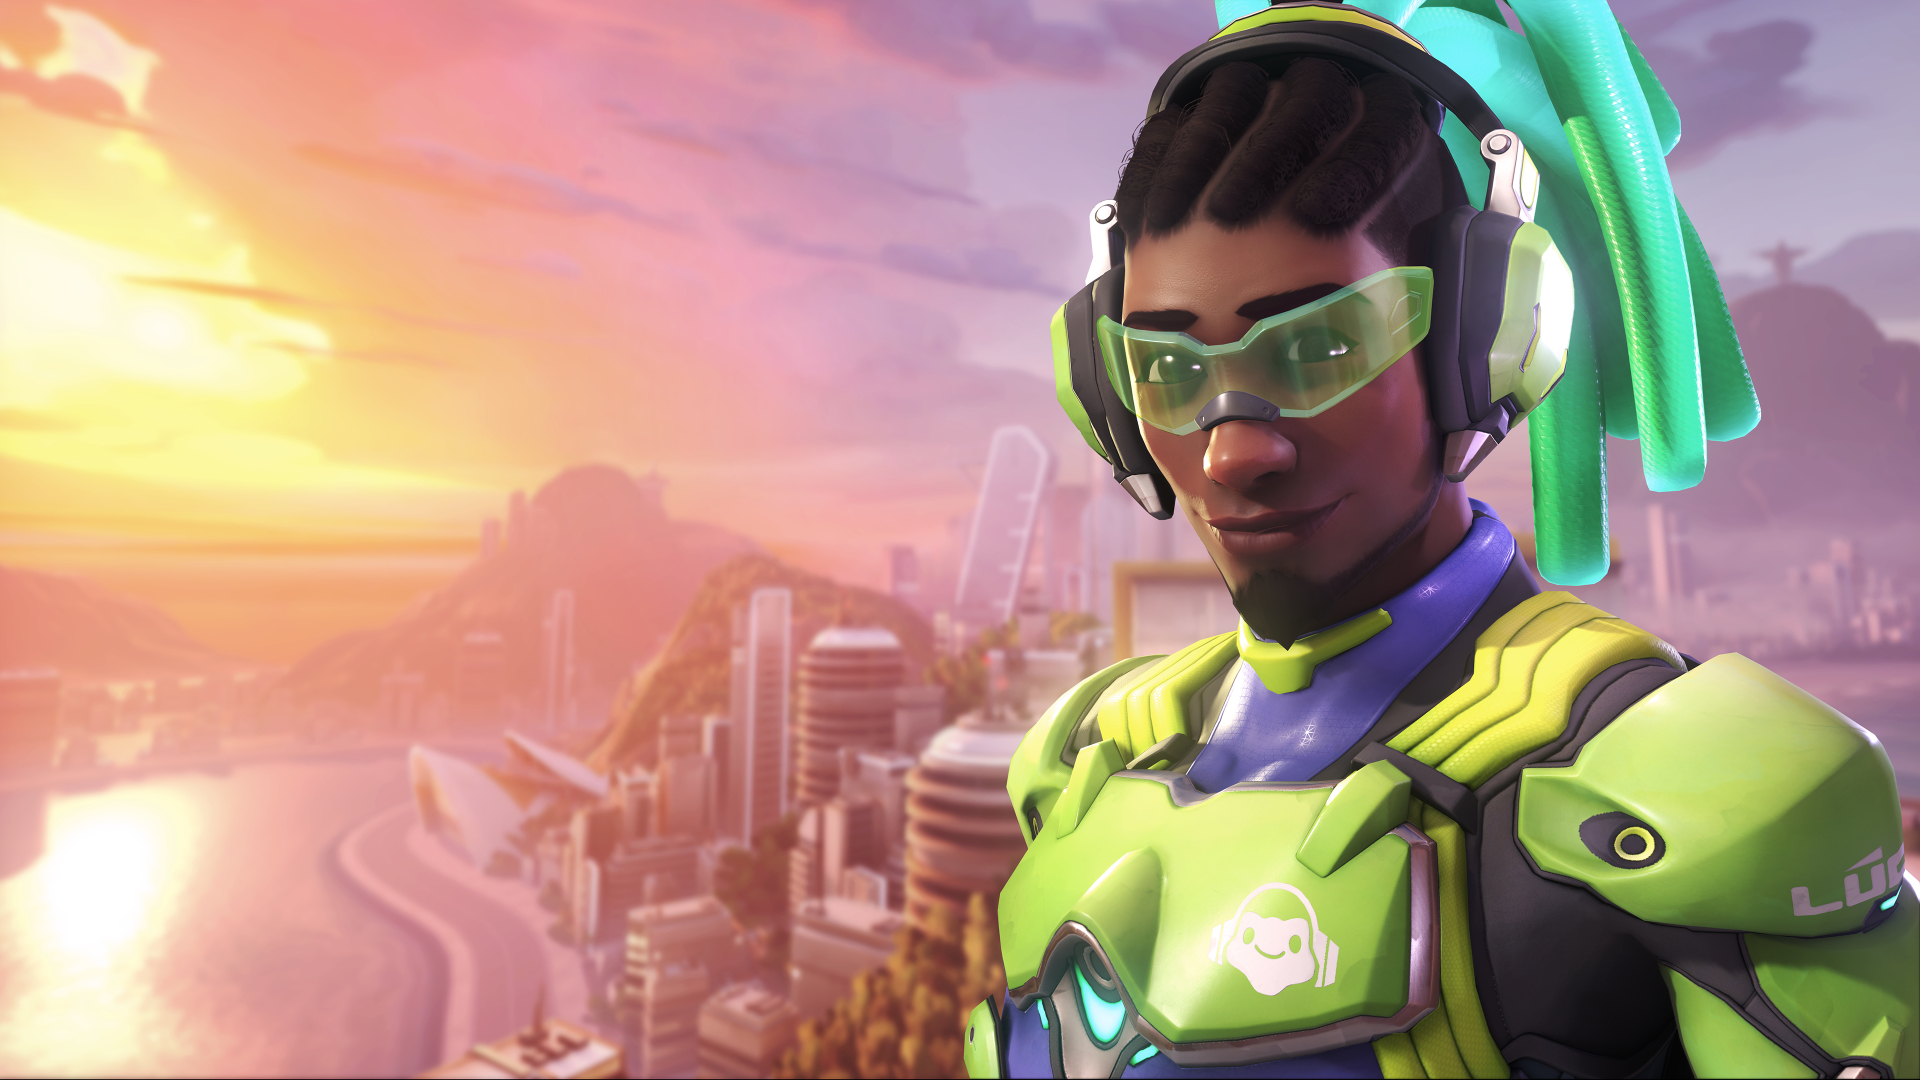 Lucio as he appears in Overwatch 2